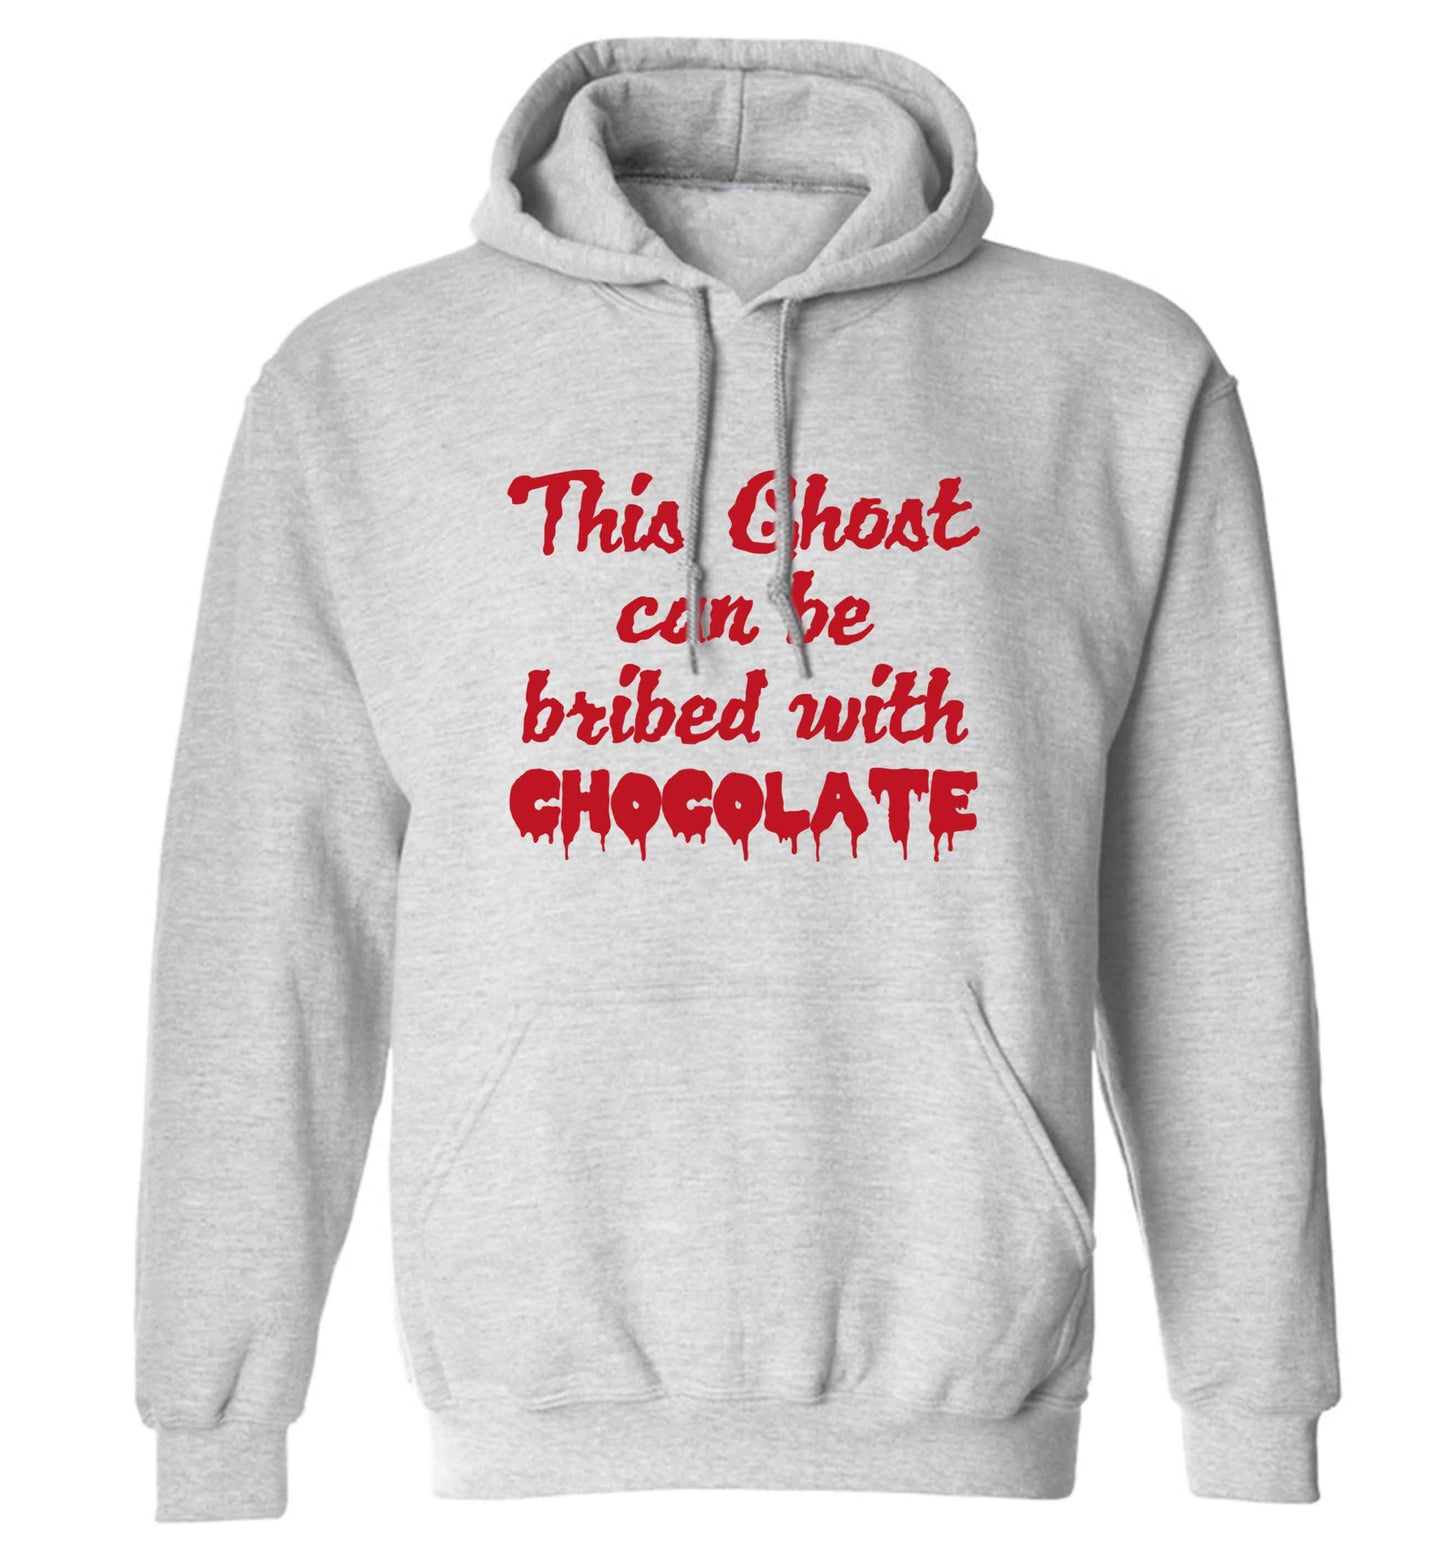 This ghost can be bribed with chocolate adults unisex grey hoodie 2XL